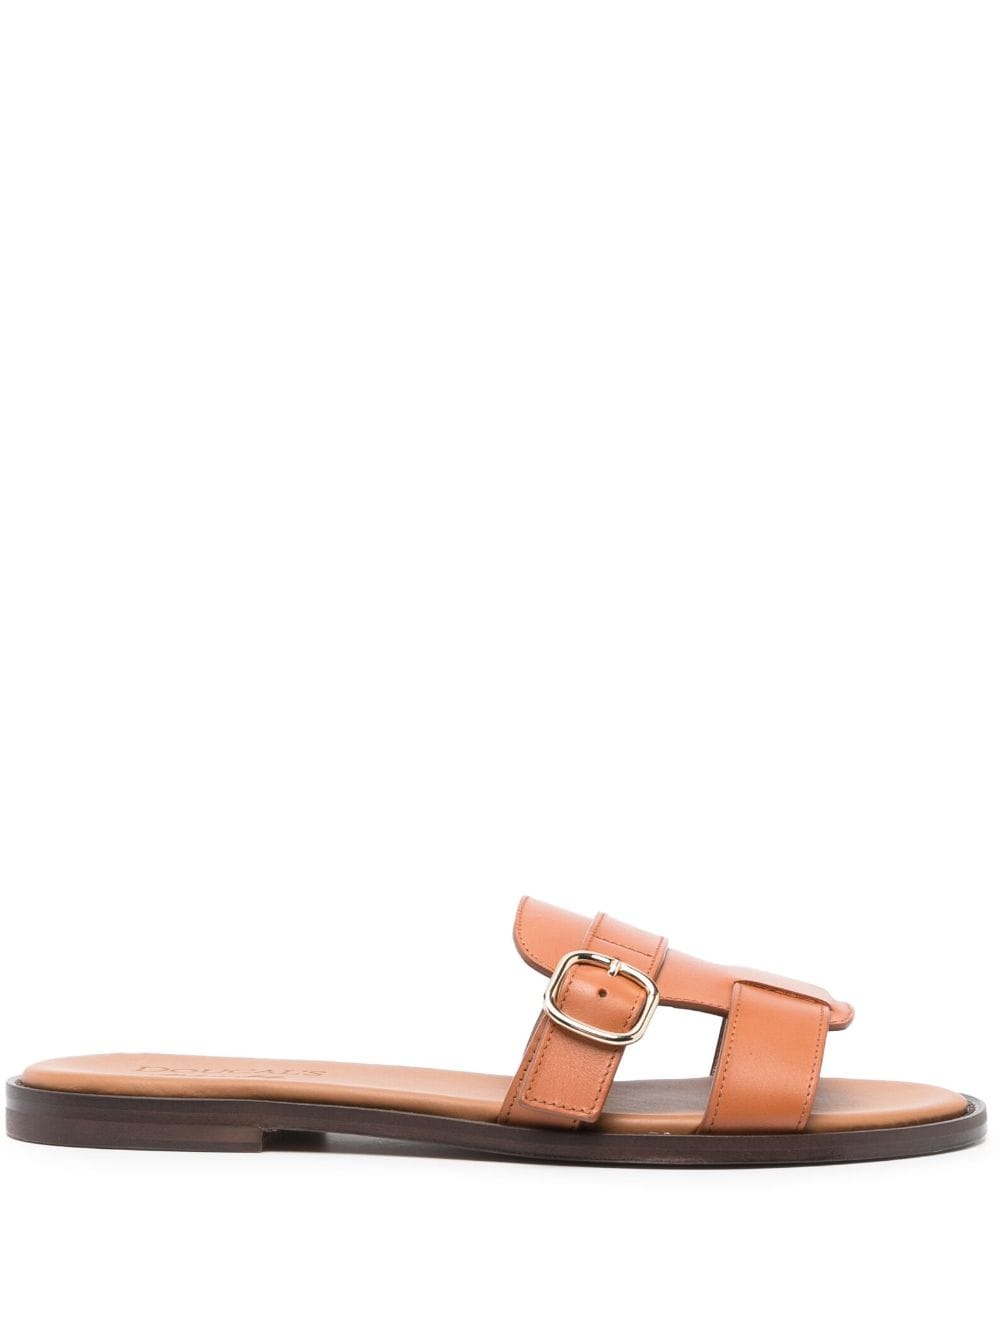 Doucal's buckle-detail leather sandals - Brown